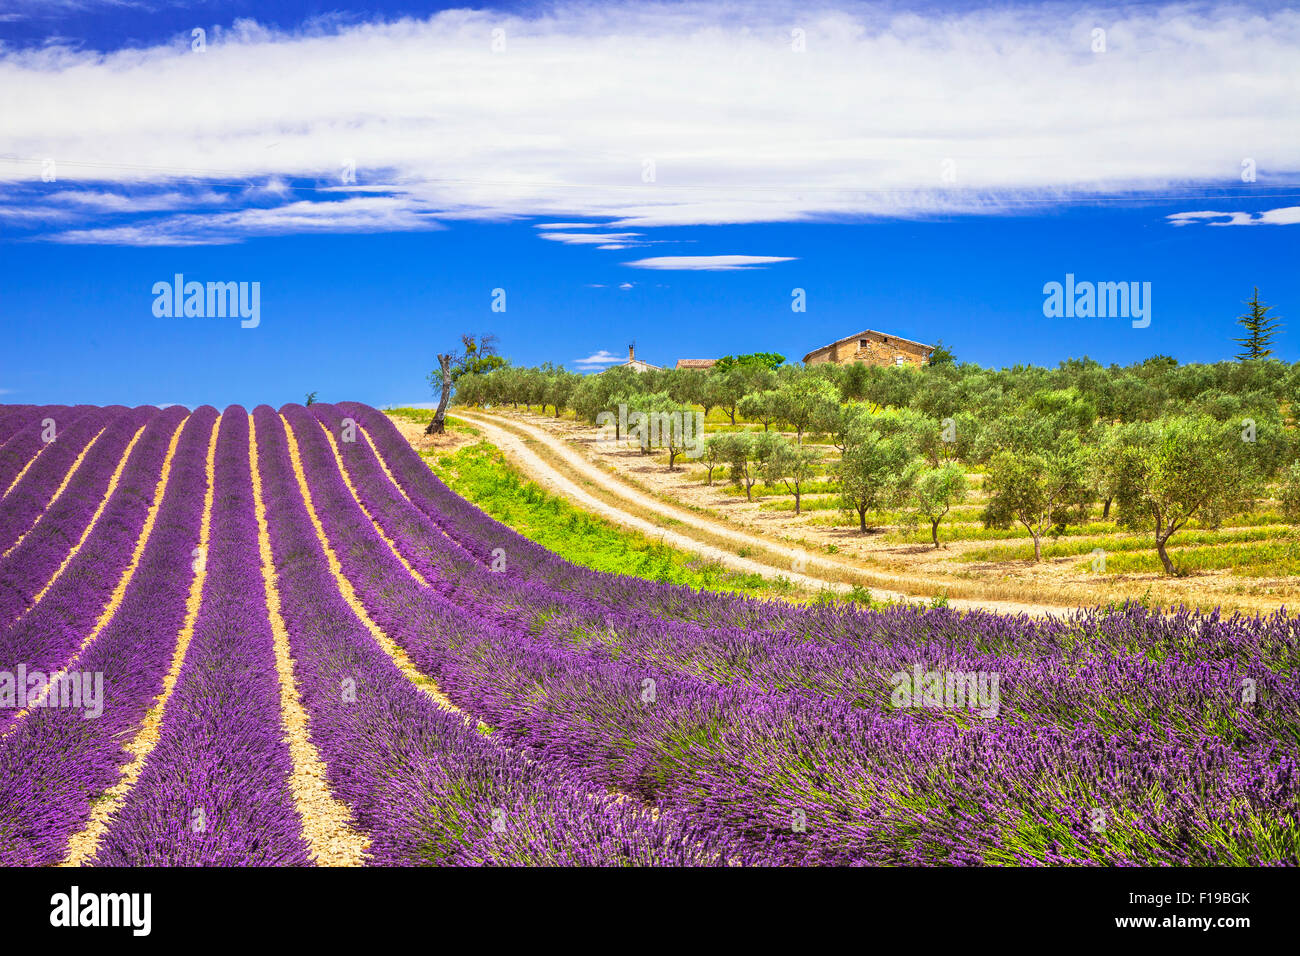 Colorful lavander fields in Valensole,France. Stock Photo